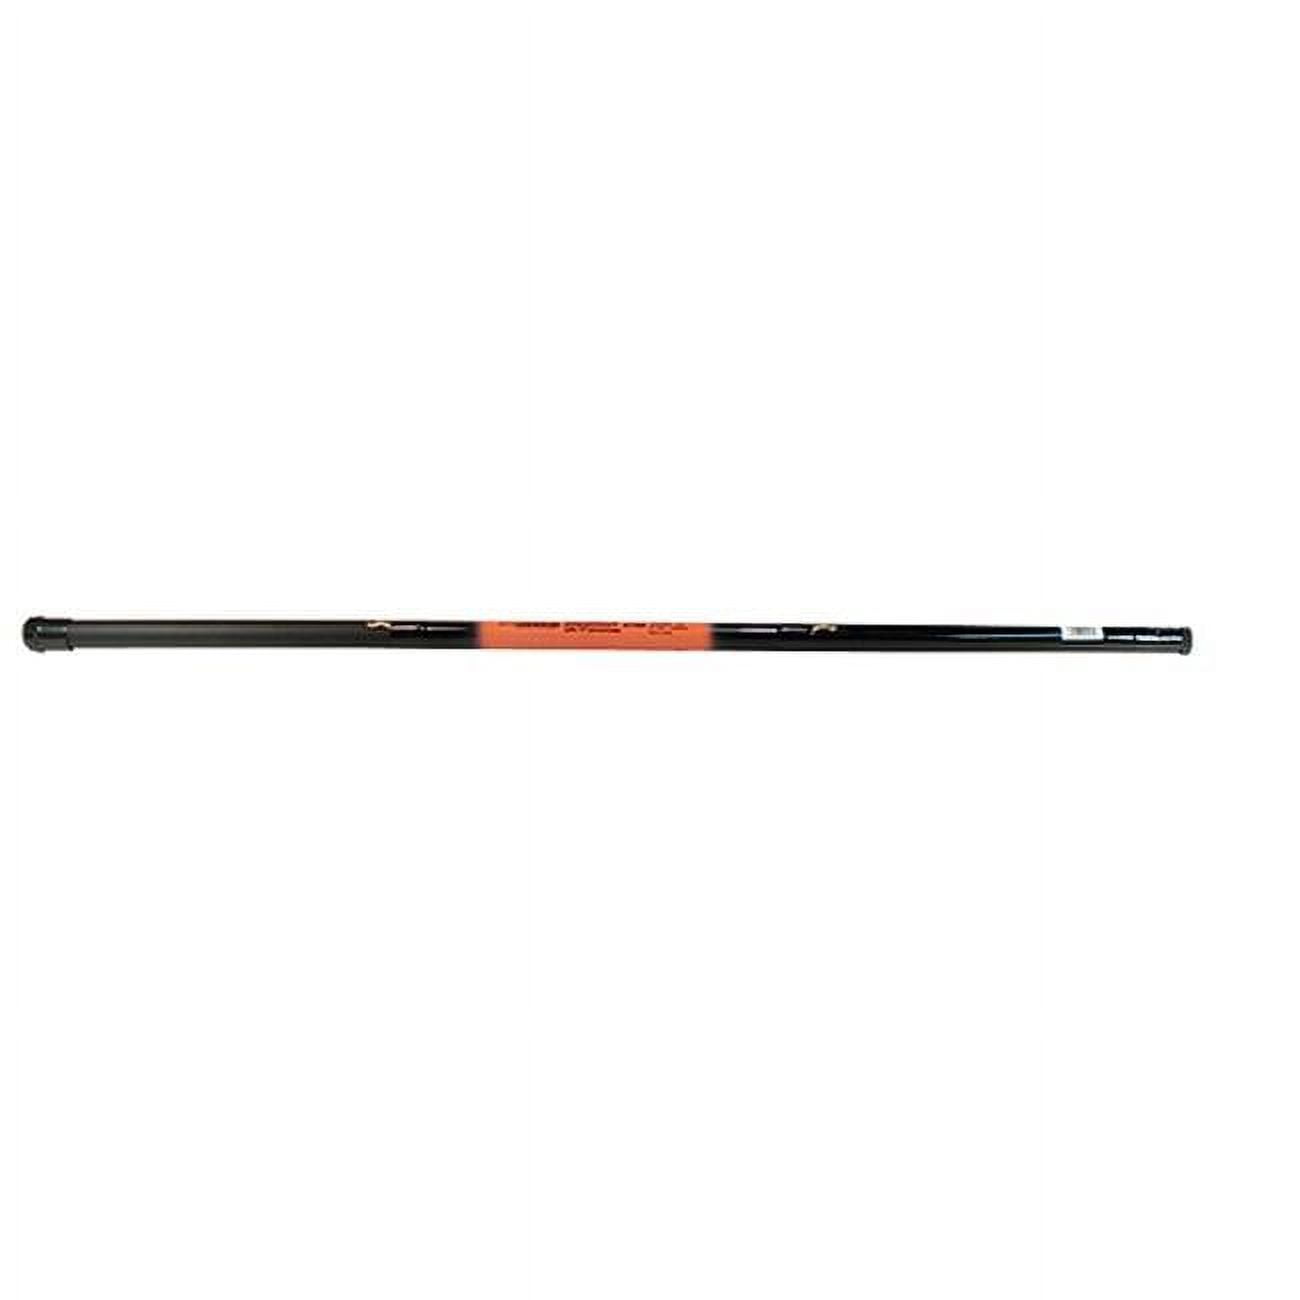 HT Enterprises 11 ft. Tackle Shooting Star Telescopic Poles with Line Winder